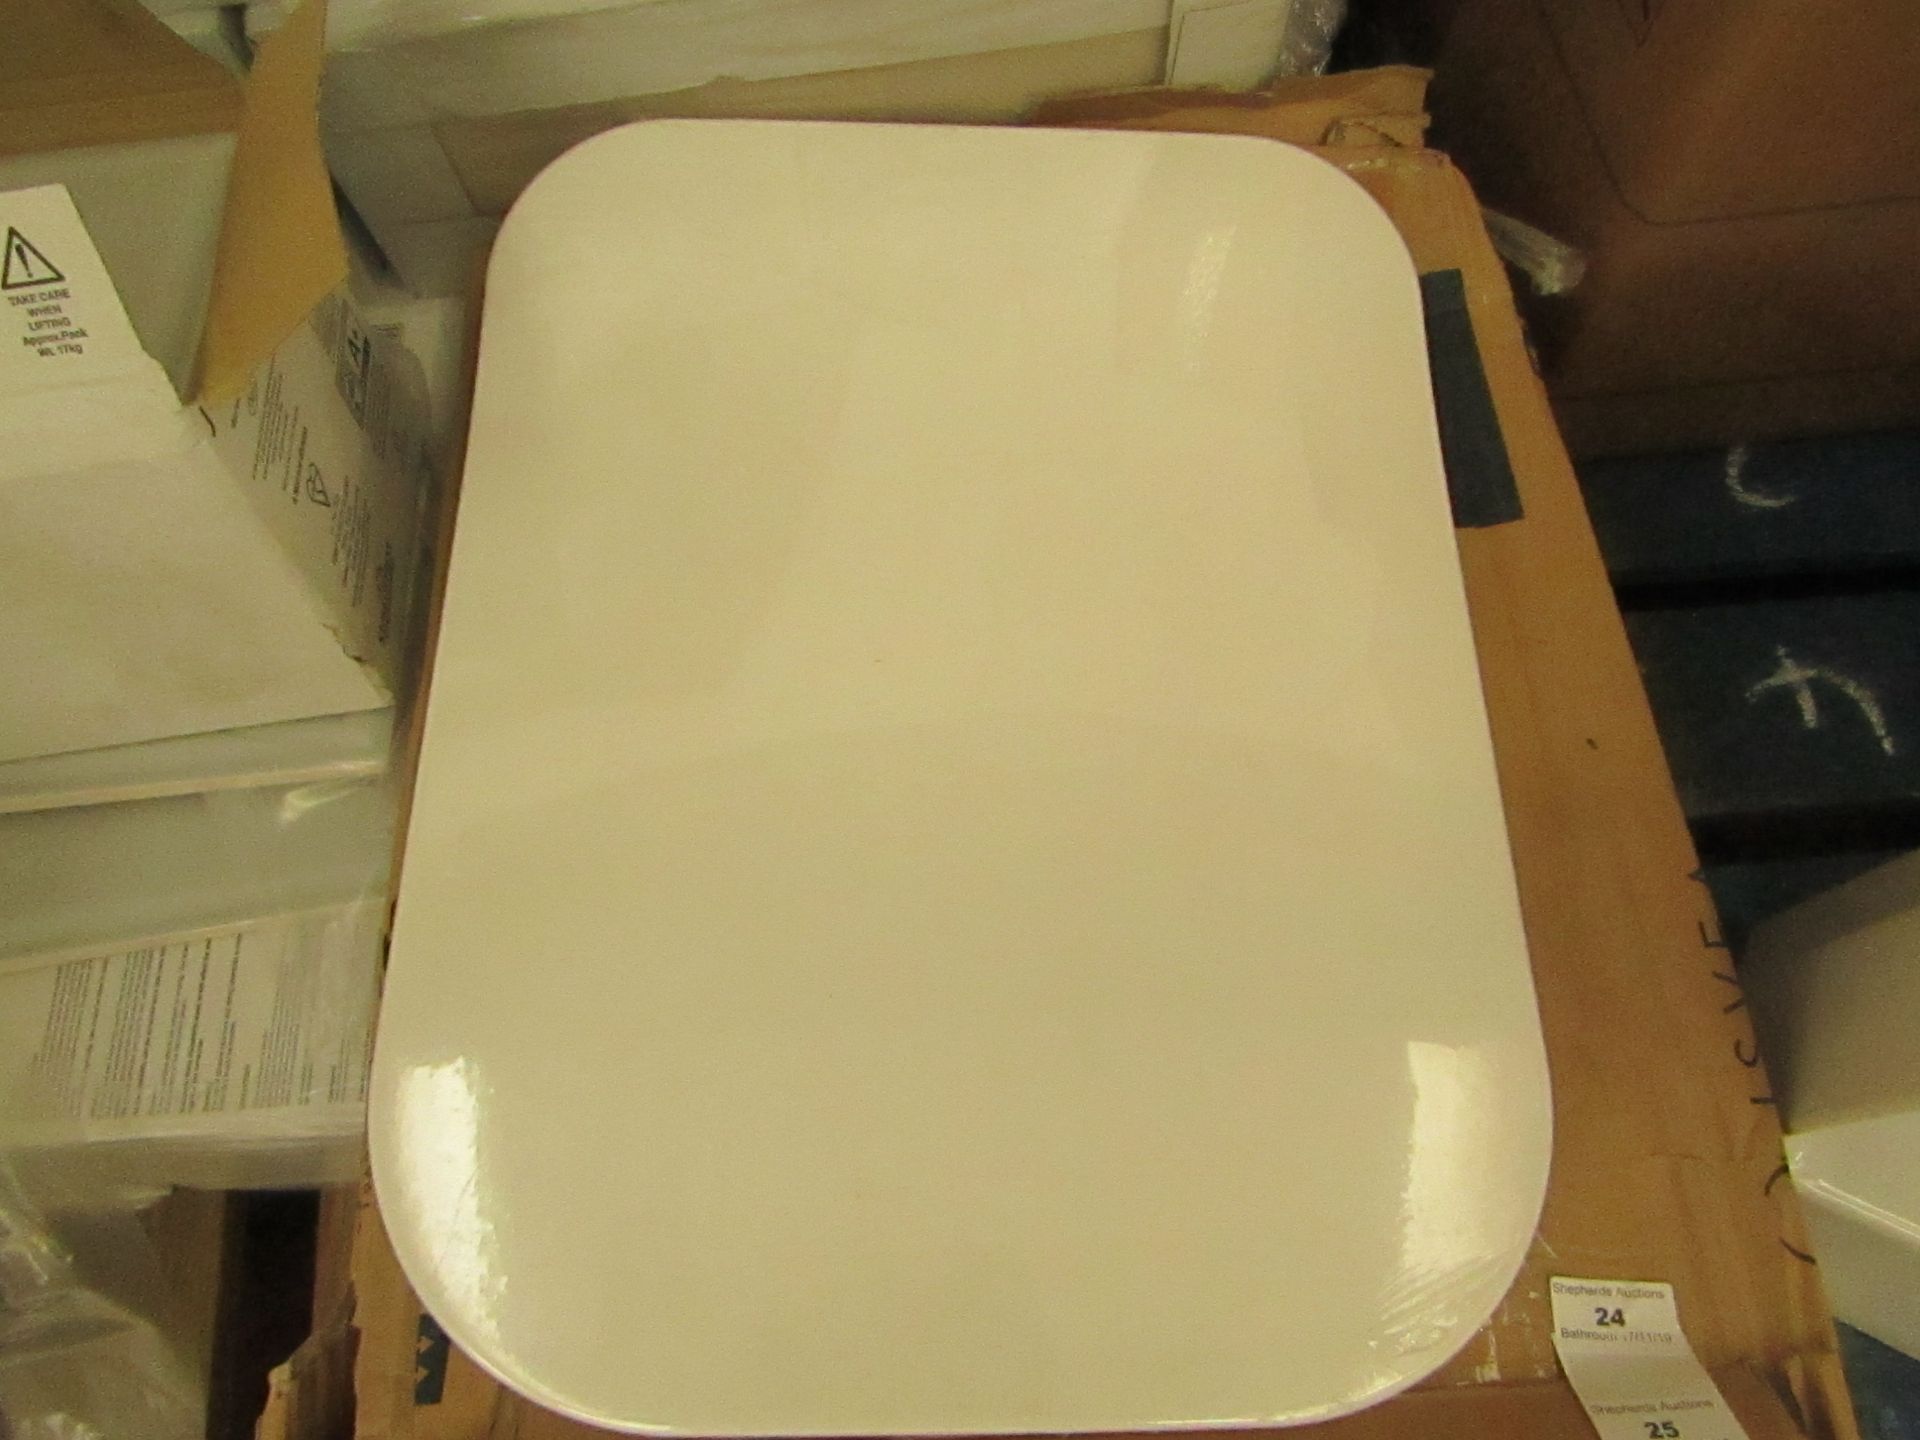 Isvea toilet seat and cover, new and boxed.